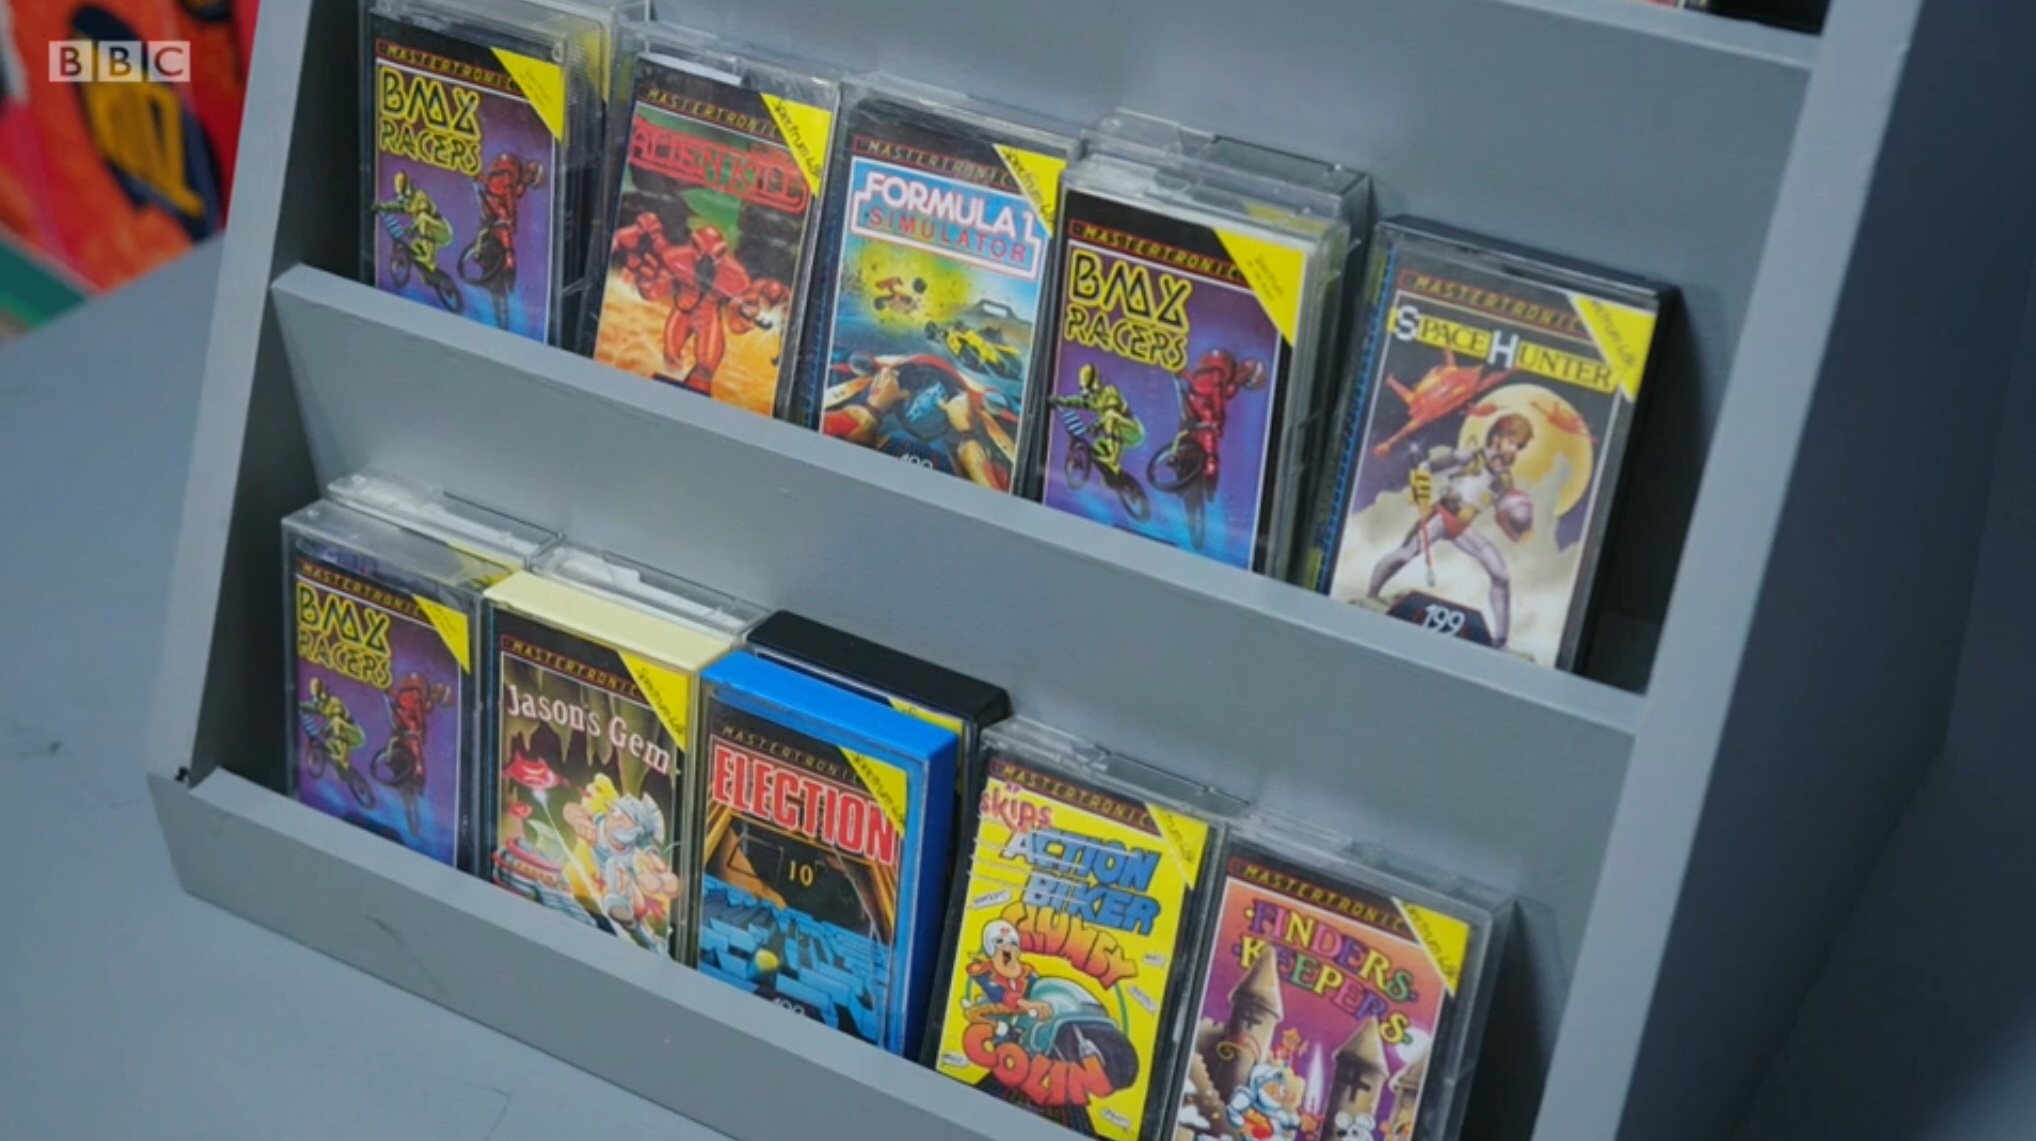 1980s computer games, sold at pocket money prices